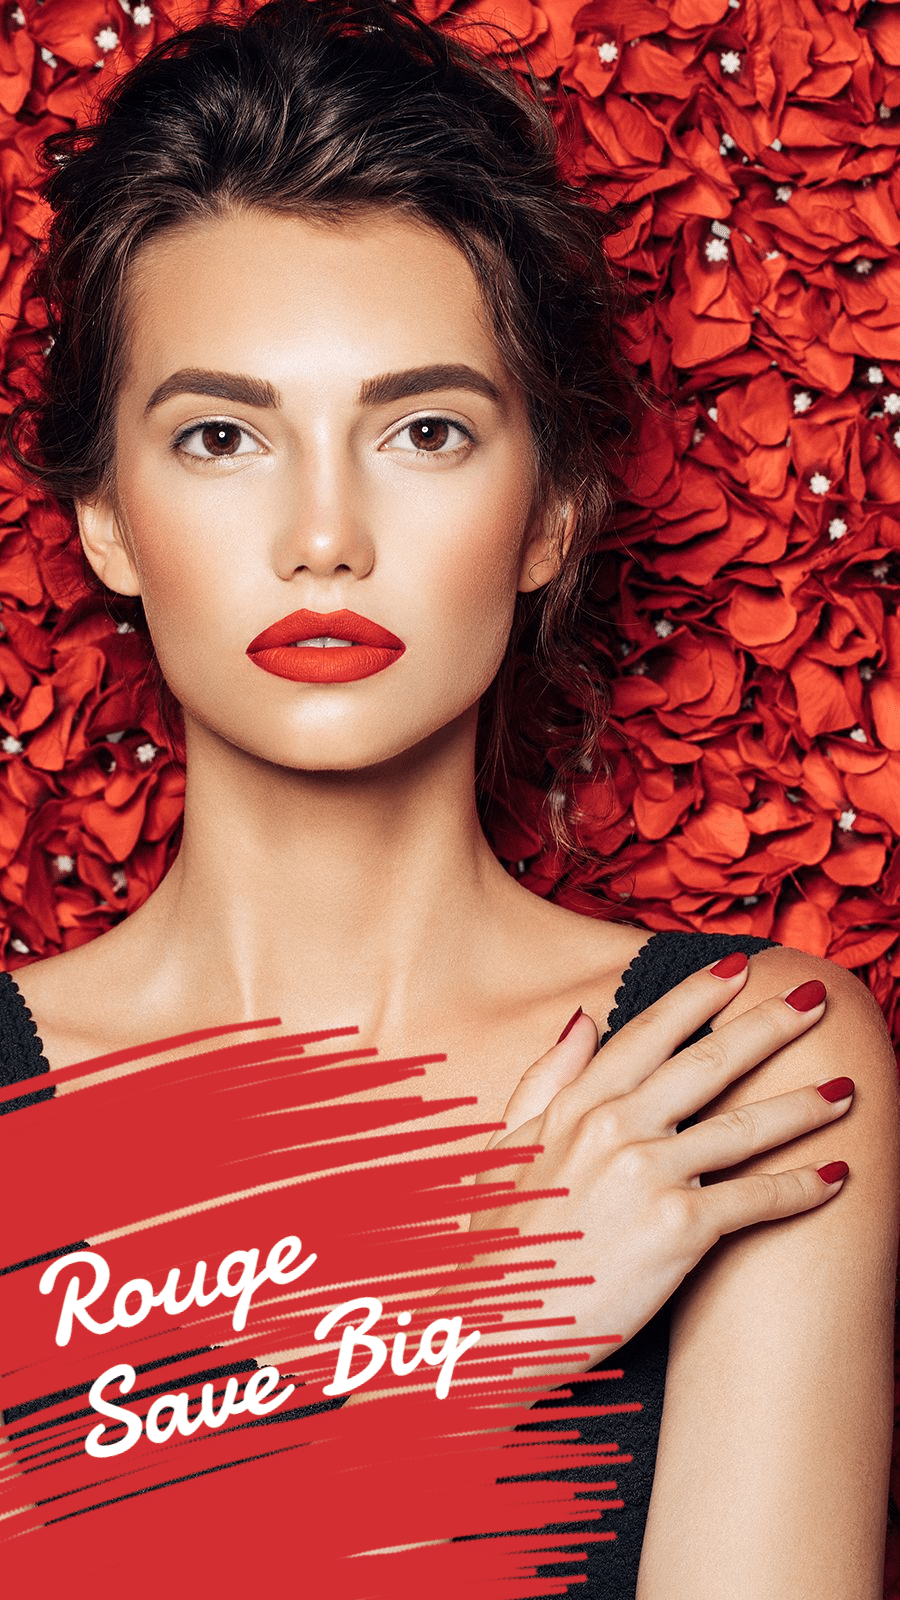 Red Roses Background Woman Photo Fashion Simple Style Poster Ecommerce Story预览效果